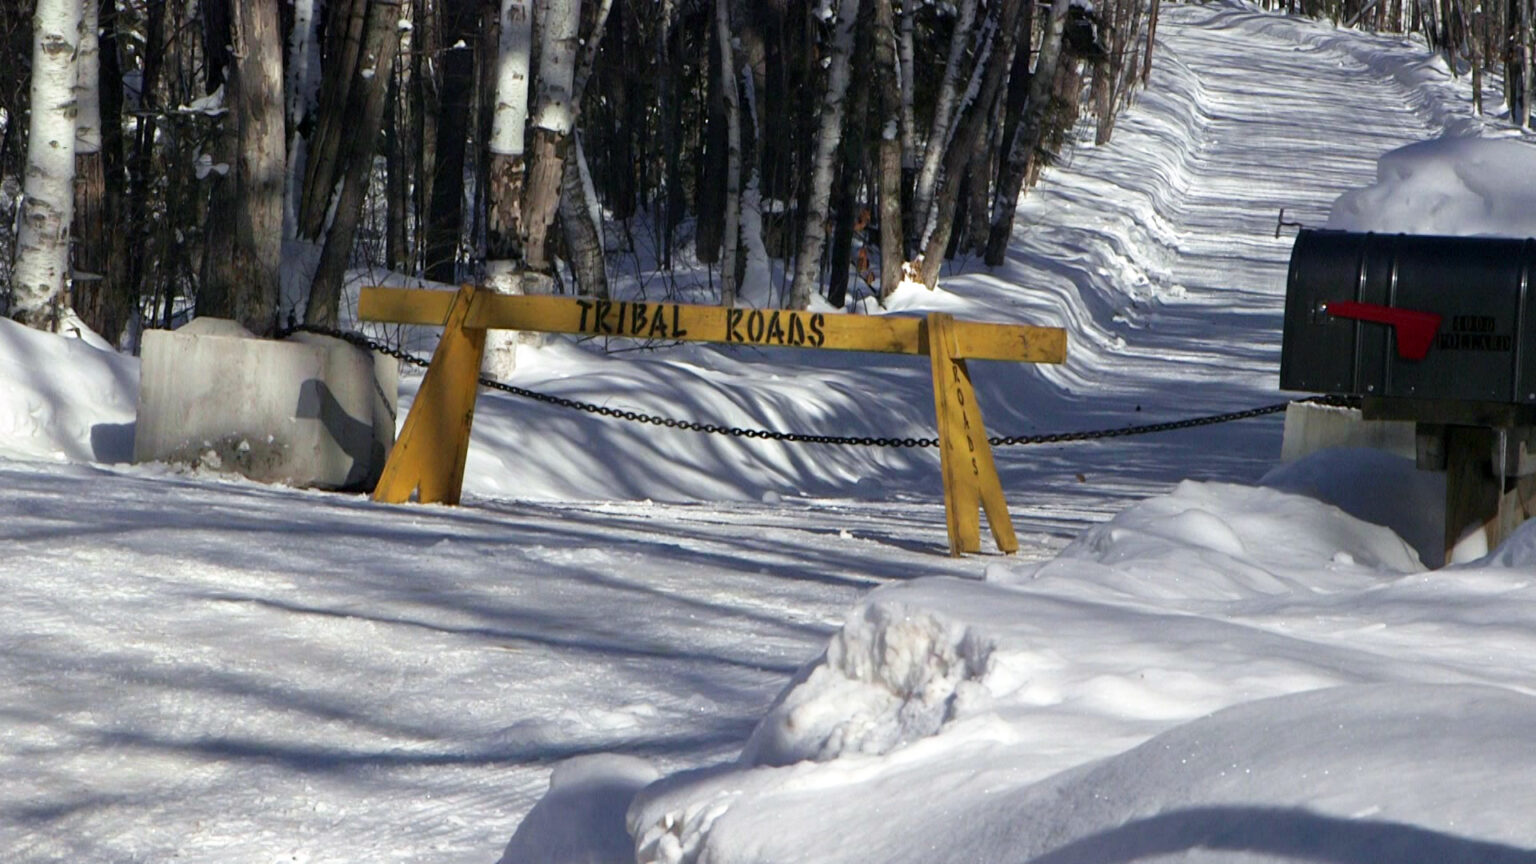 A wood road barrier with tribal roads painted on it and two concrete blocks connected with a metal chain sit in front of a road covered in snow, with a mailbox in the foreground and trees in the background.